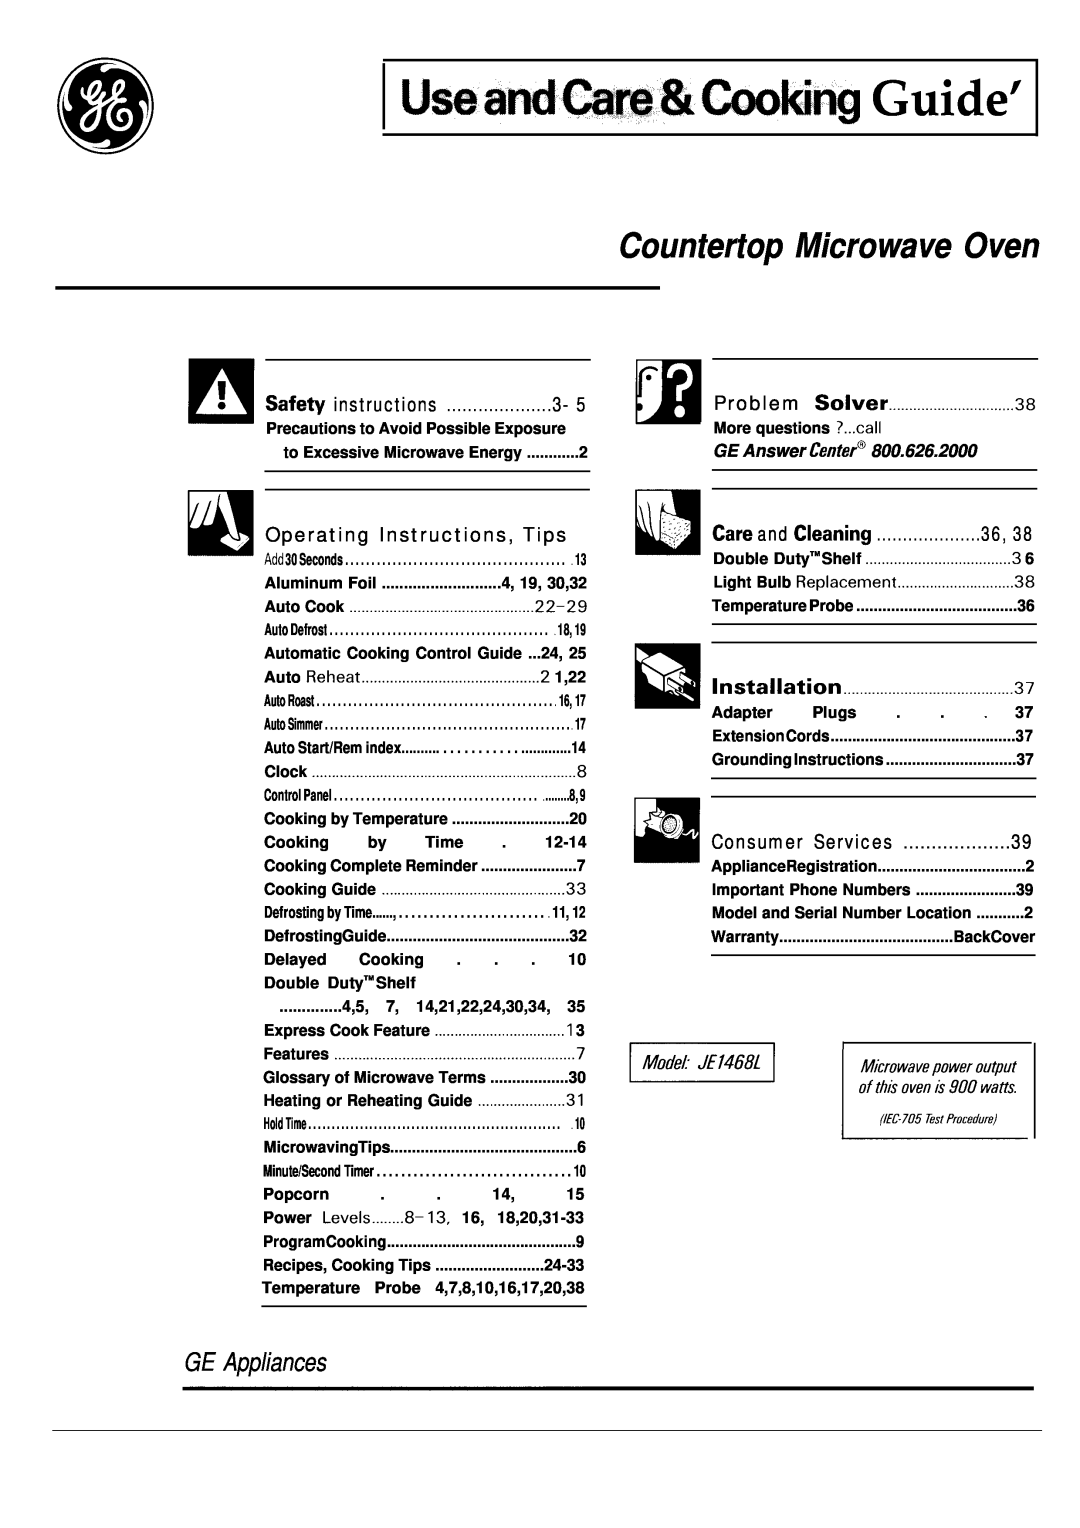 GE JE1468L operating instructions Countertop Microwave Oven, ‘Mode’JE’468L’ E, UseandGre&WKng Guide’, GE Appliances 